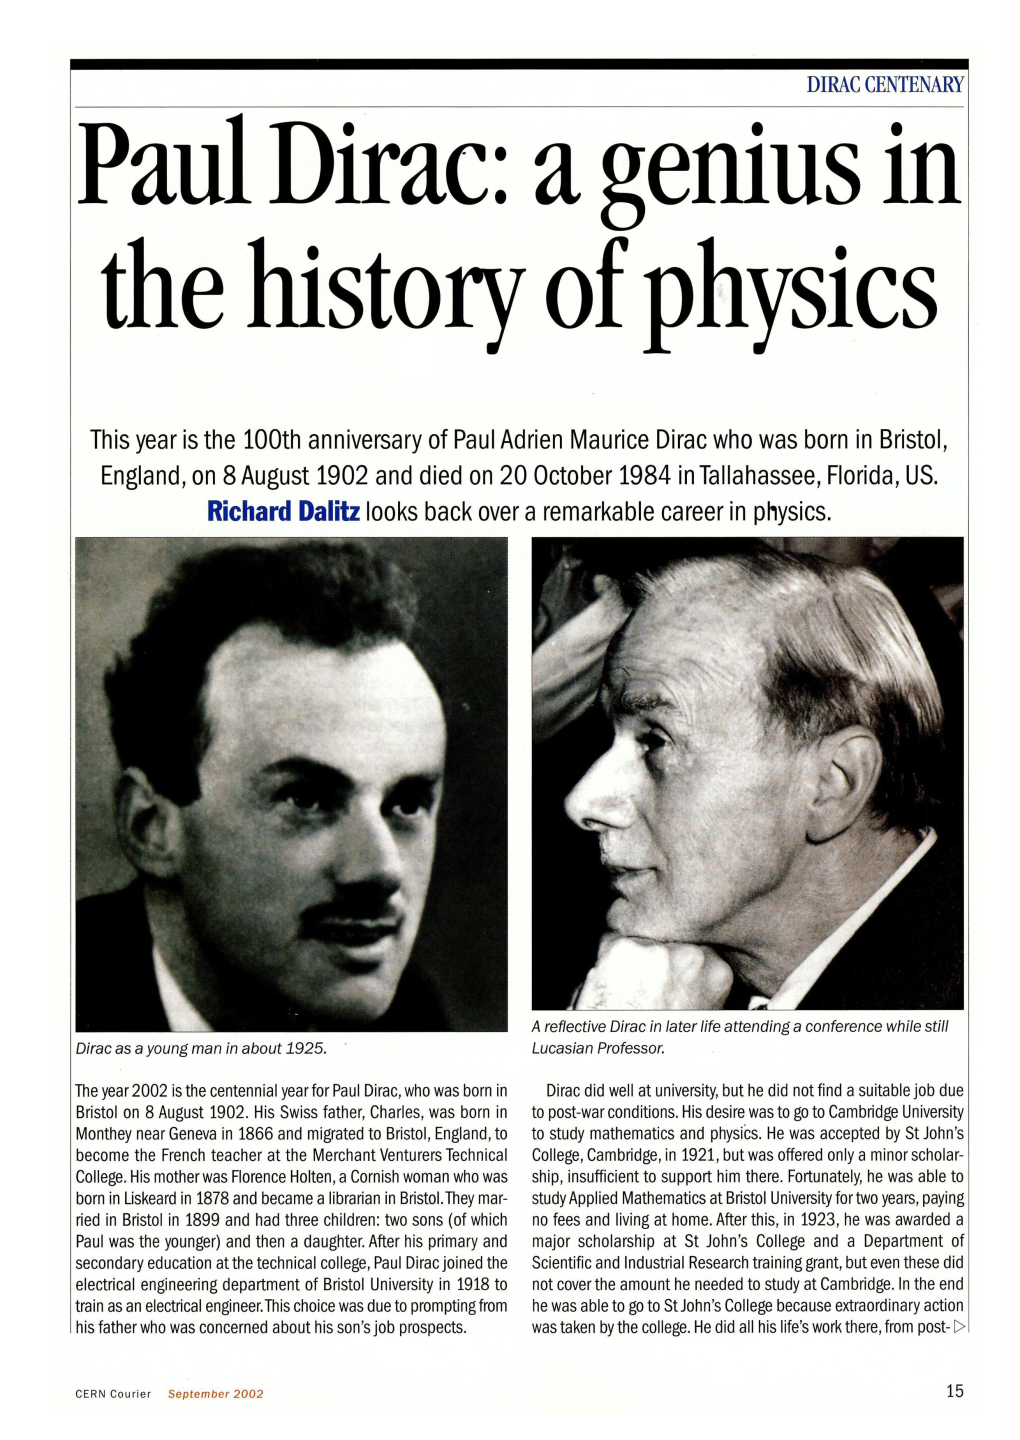 Paul Dirac: a Genius in the History of Physics